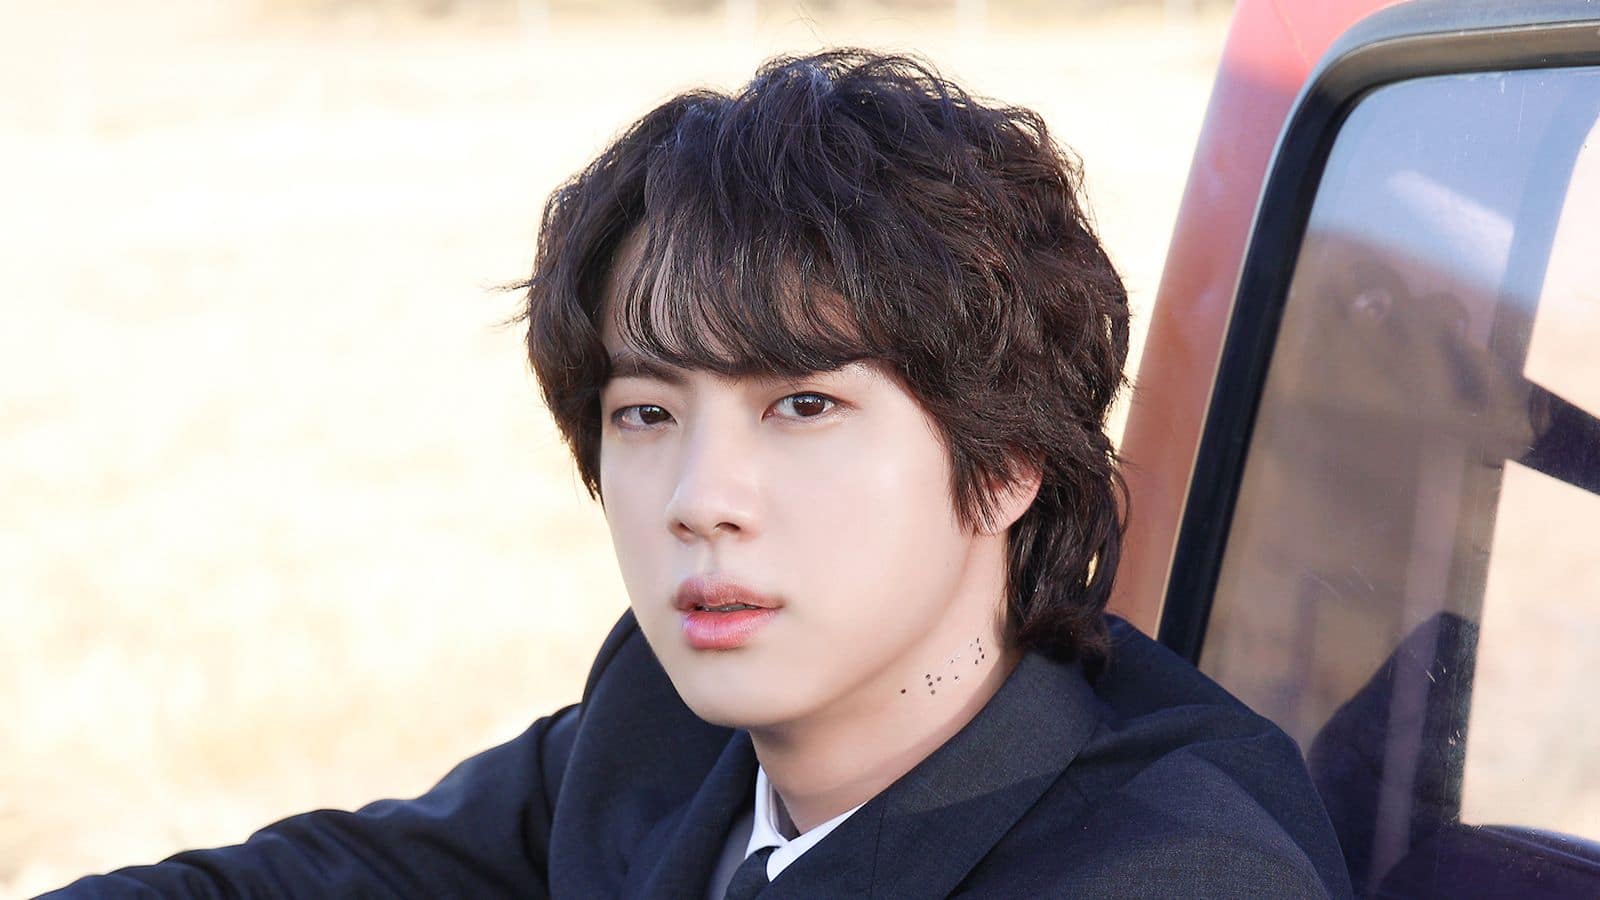 BTS's Jin nears end of military service, HYBE announces guidelines